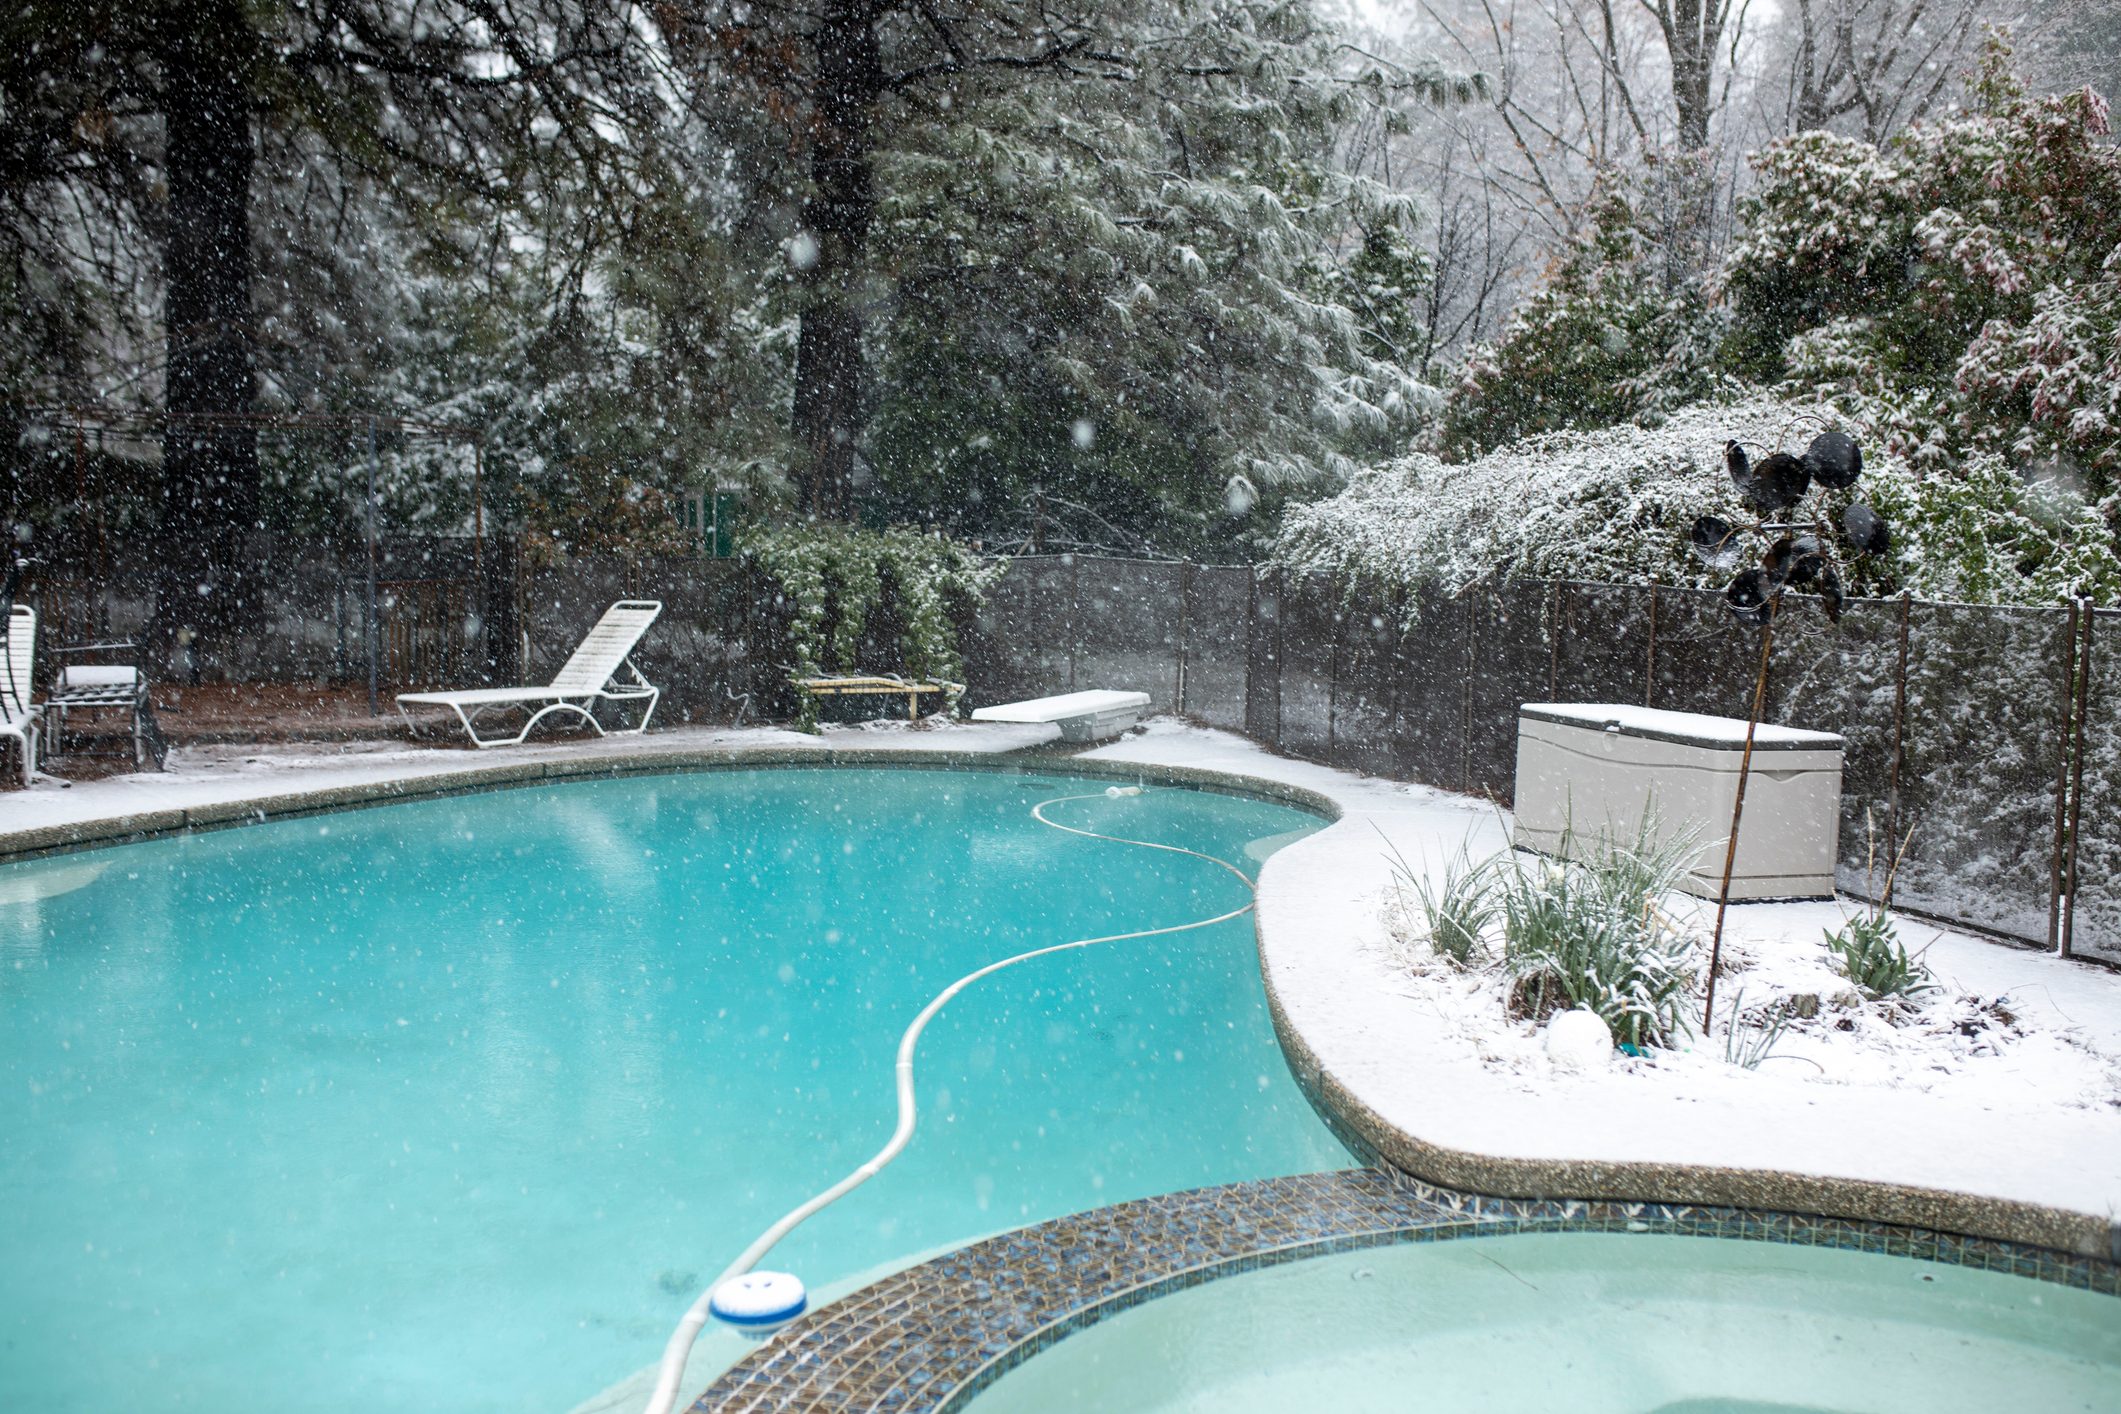 Backyard Winter Pool in Snow with Clear Blue Water and White Trees